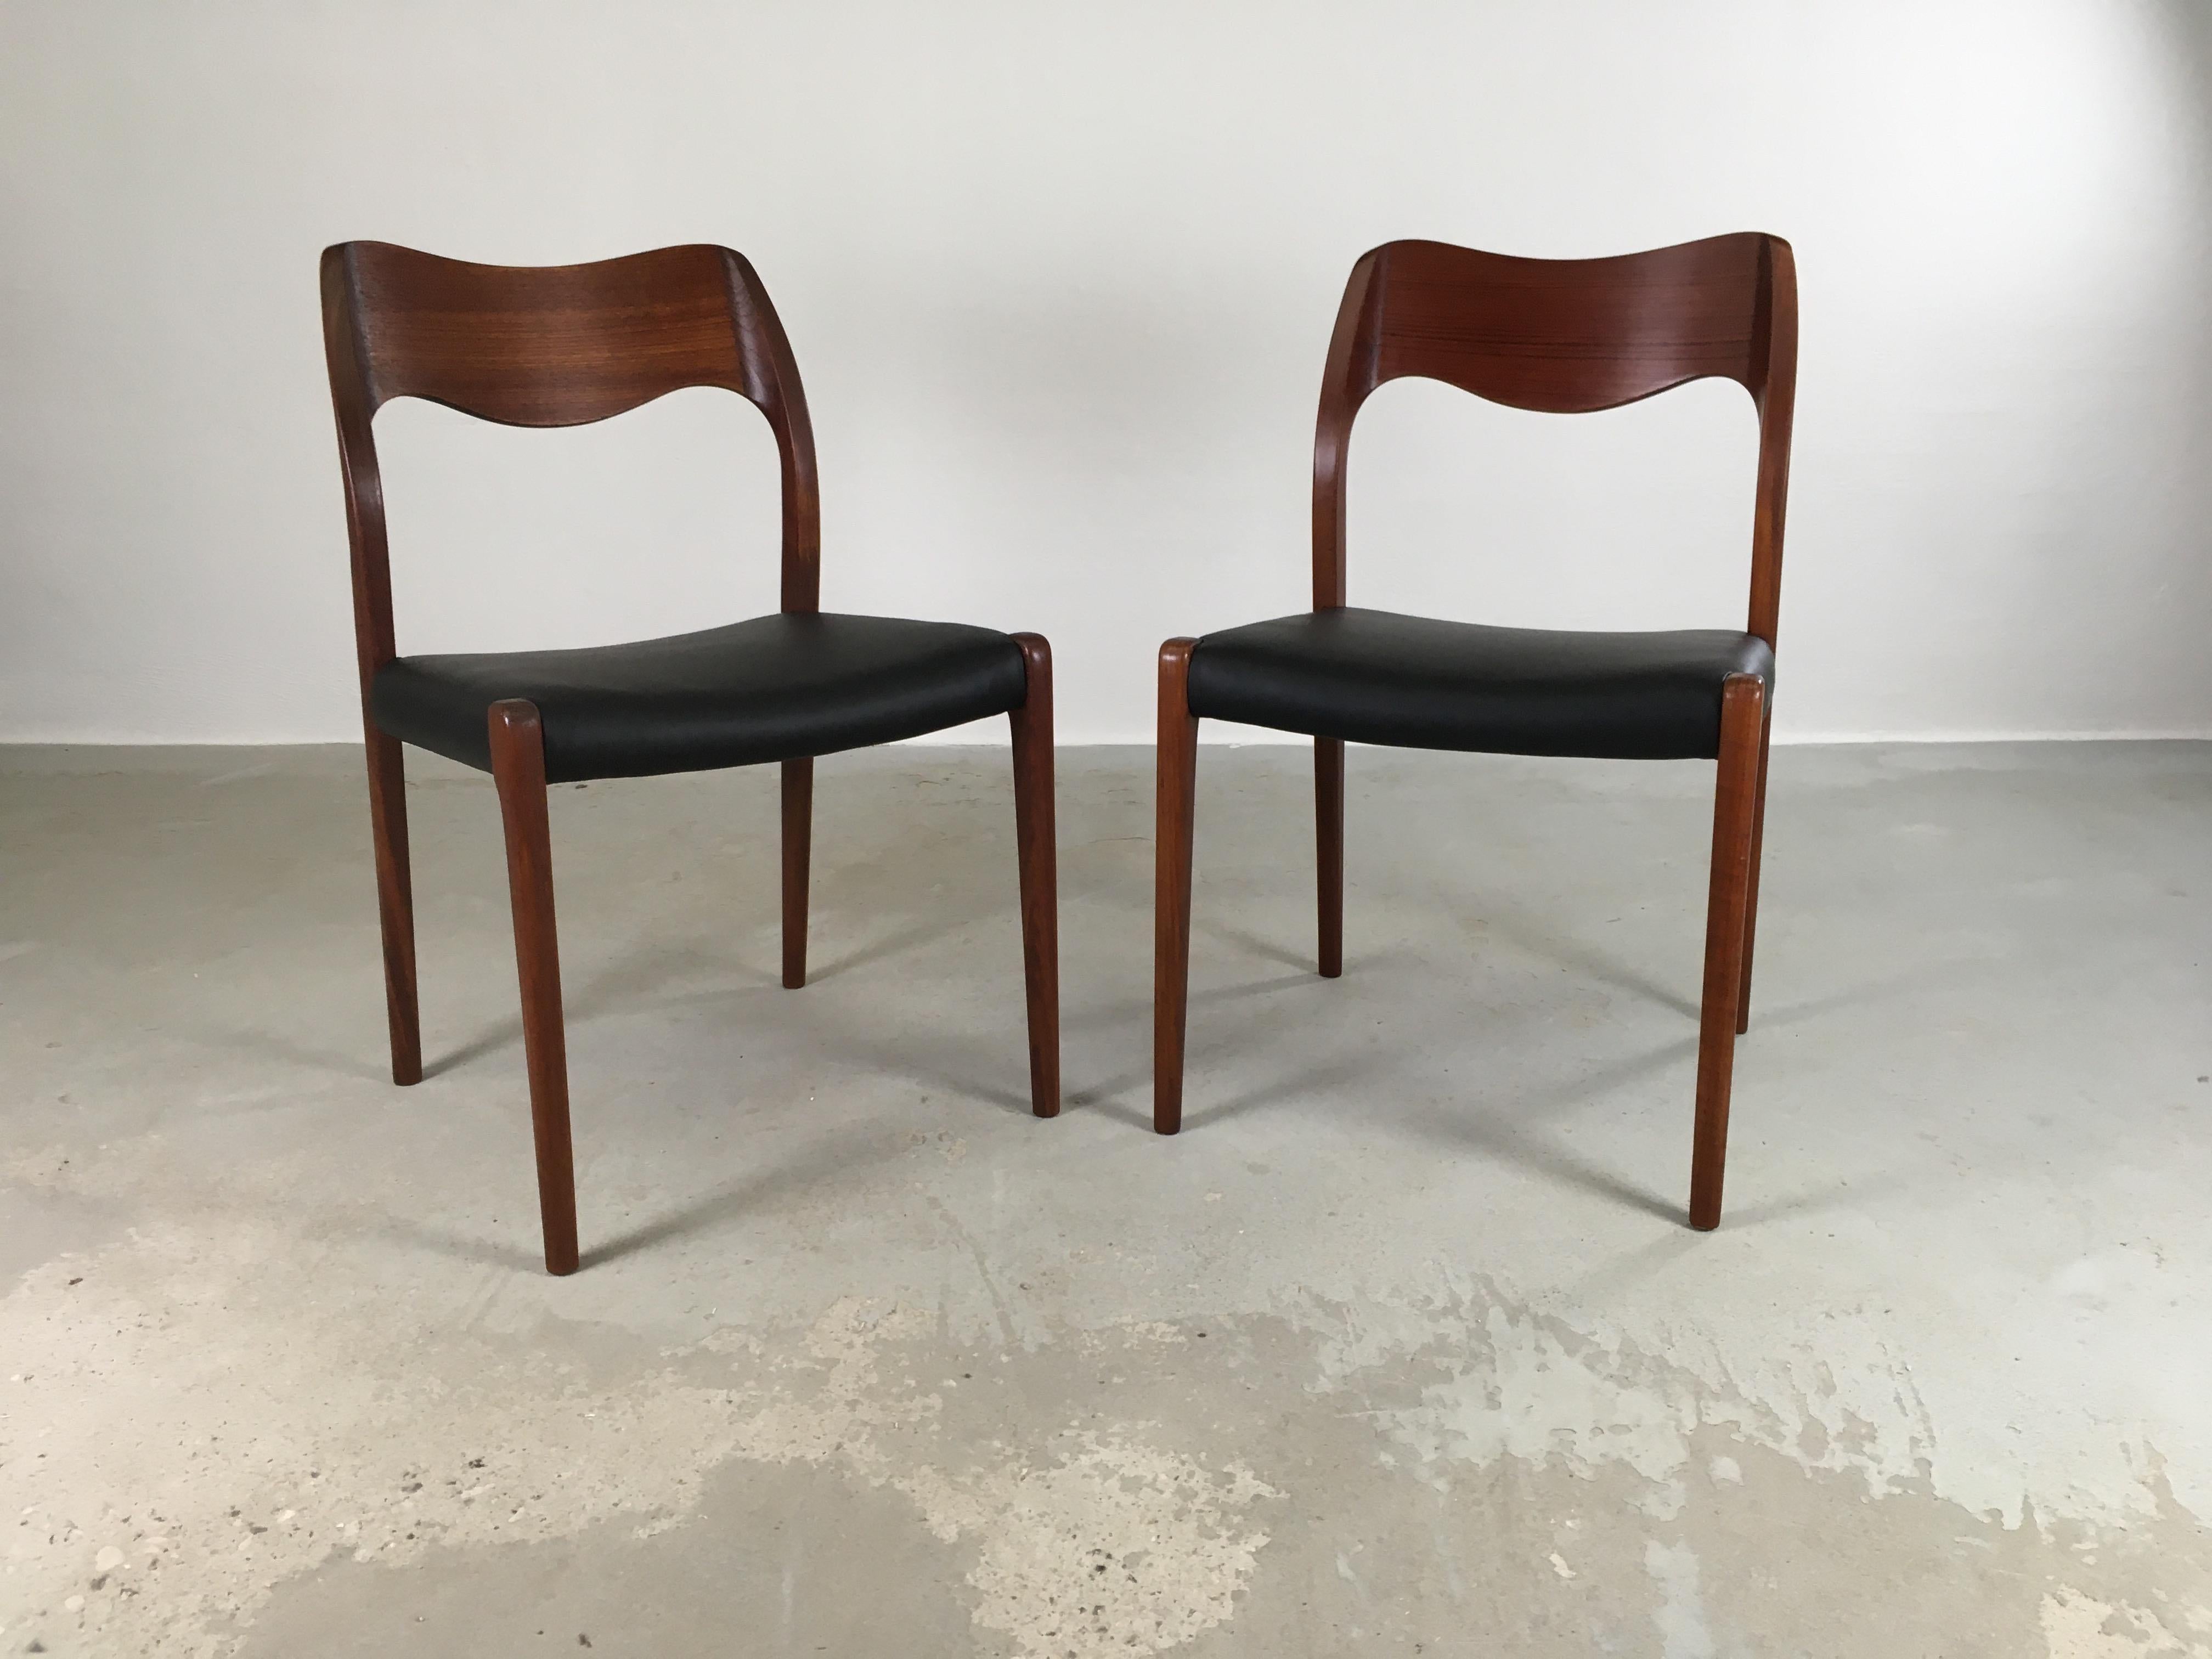 Set of eigth fully restored teak dining chairs including custom reupholstery designed by Niels Otto Møller in 1951.

The chairs feature a solid frame and backrest in teak designed with straight lined legs and an elegant organic shaped backrest with